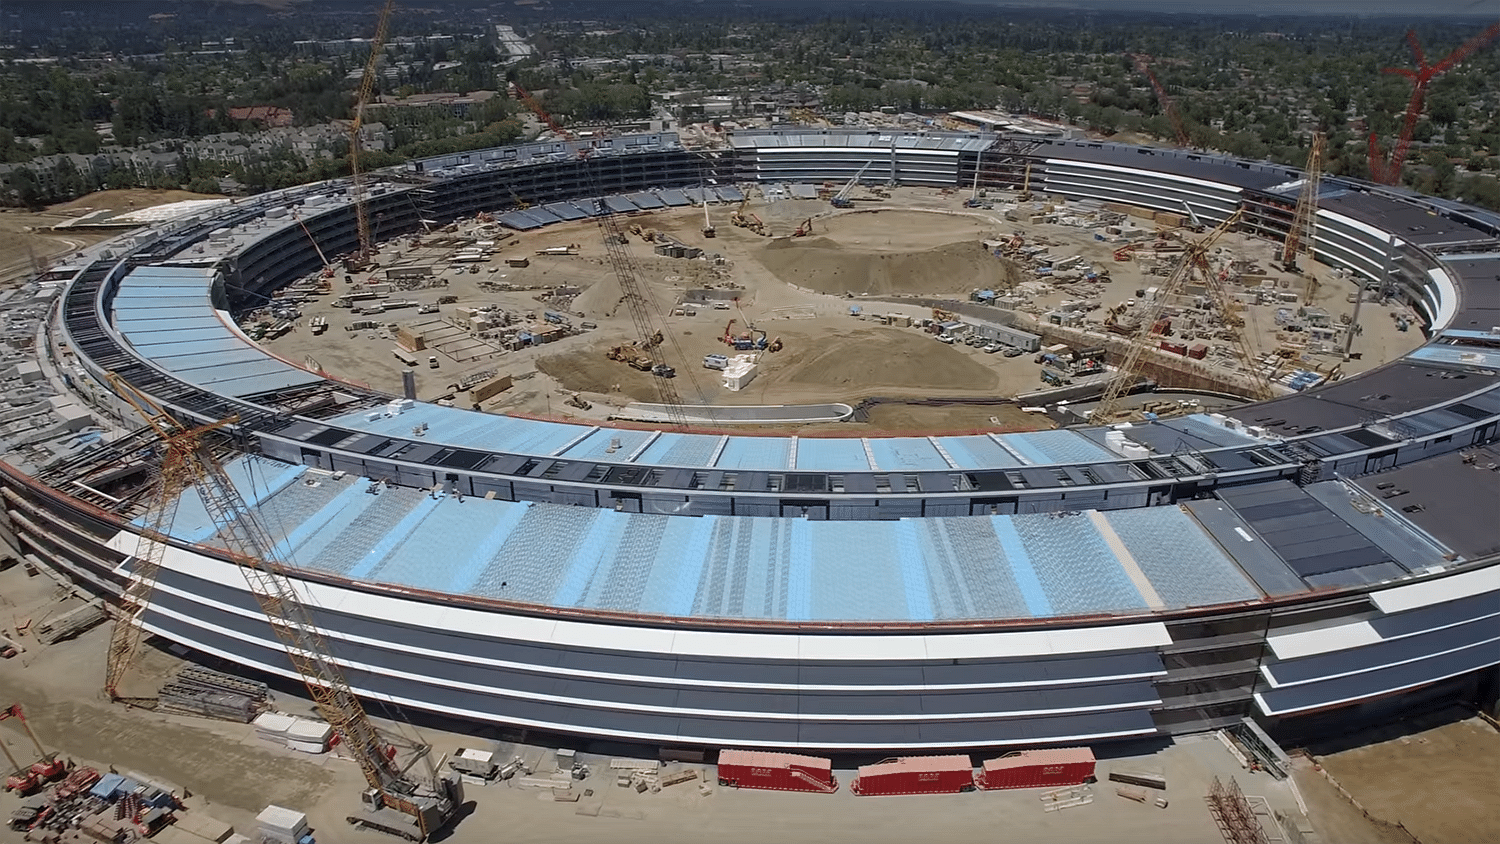 The work on Apple Campus is moving at a quick pace. (Photo: YouTube screen grab/<a href="https://www.youtube.com/watch?v=V8W33JxjIAw">Matthew</a>)